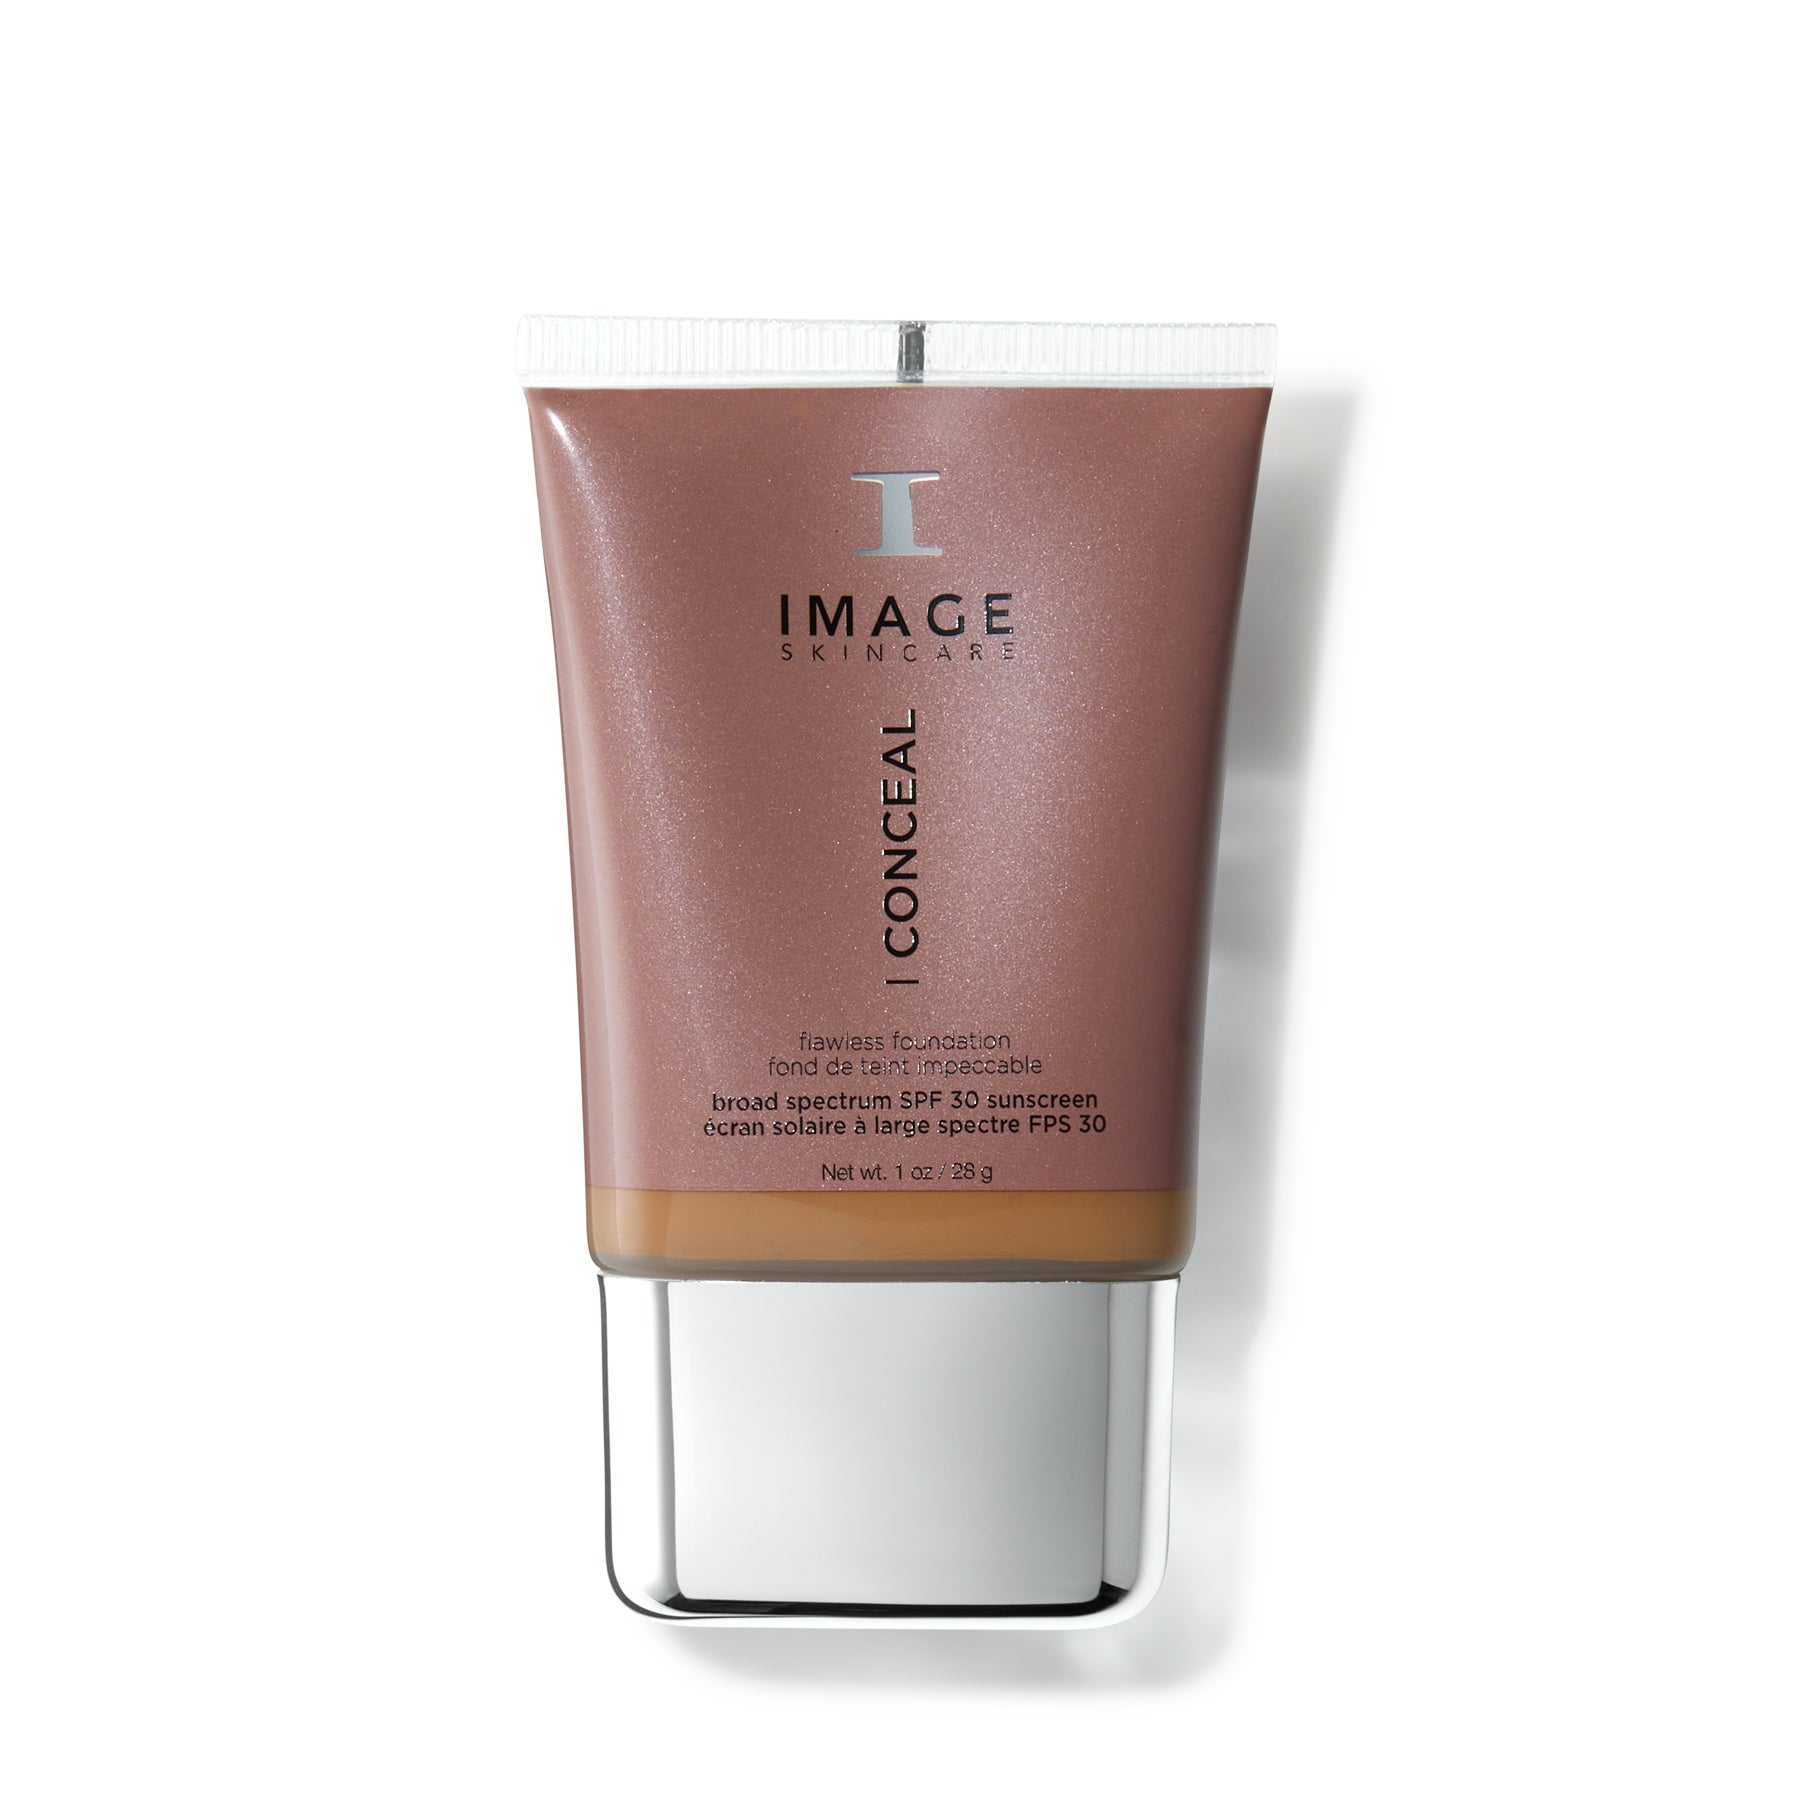 I CONCEAL flawless foundation broad-spectrum SPF 30 sunscreen Deep Honey